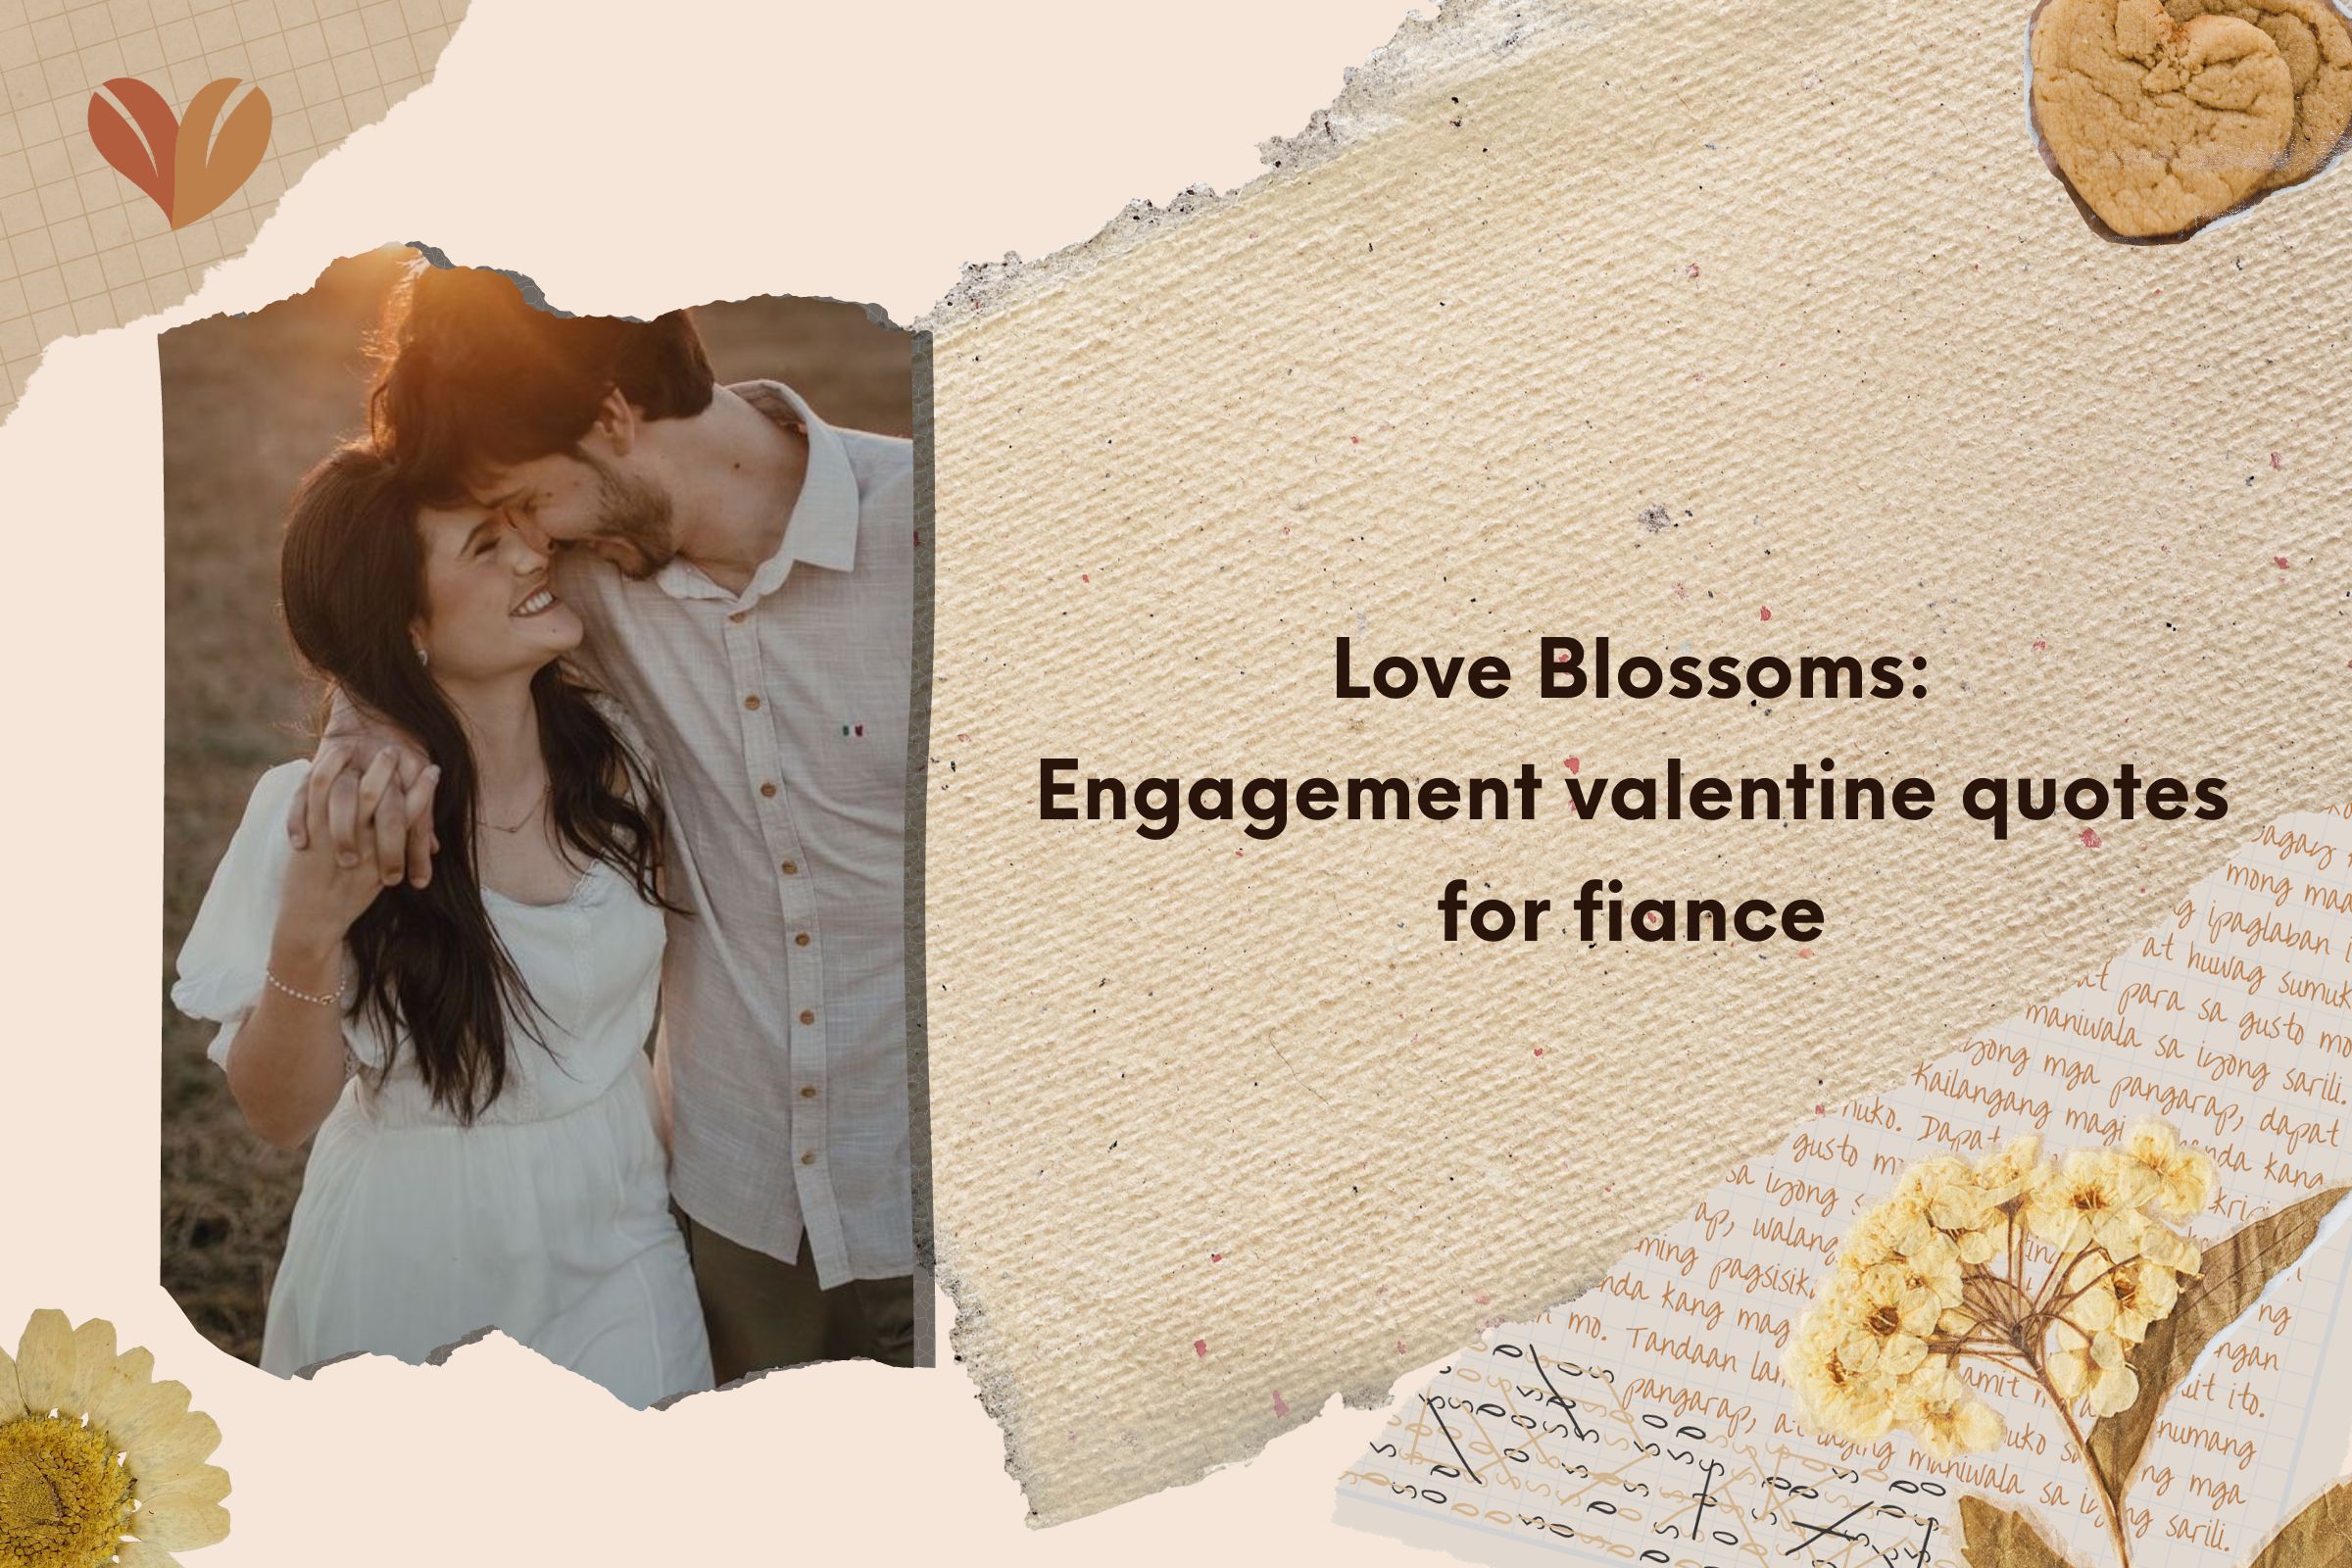 Love Blossoms:Engagement valentine quotes for fiance